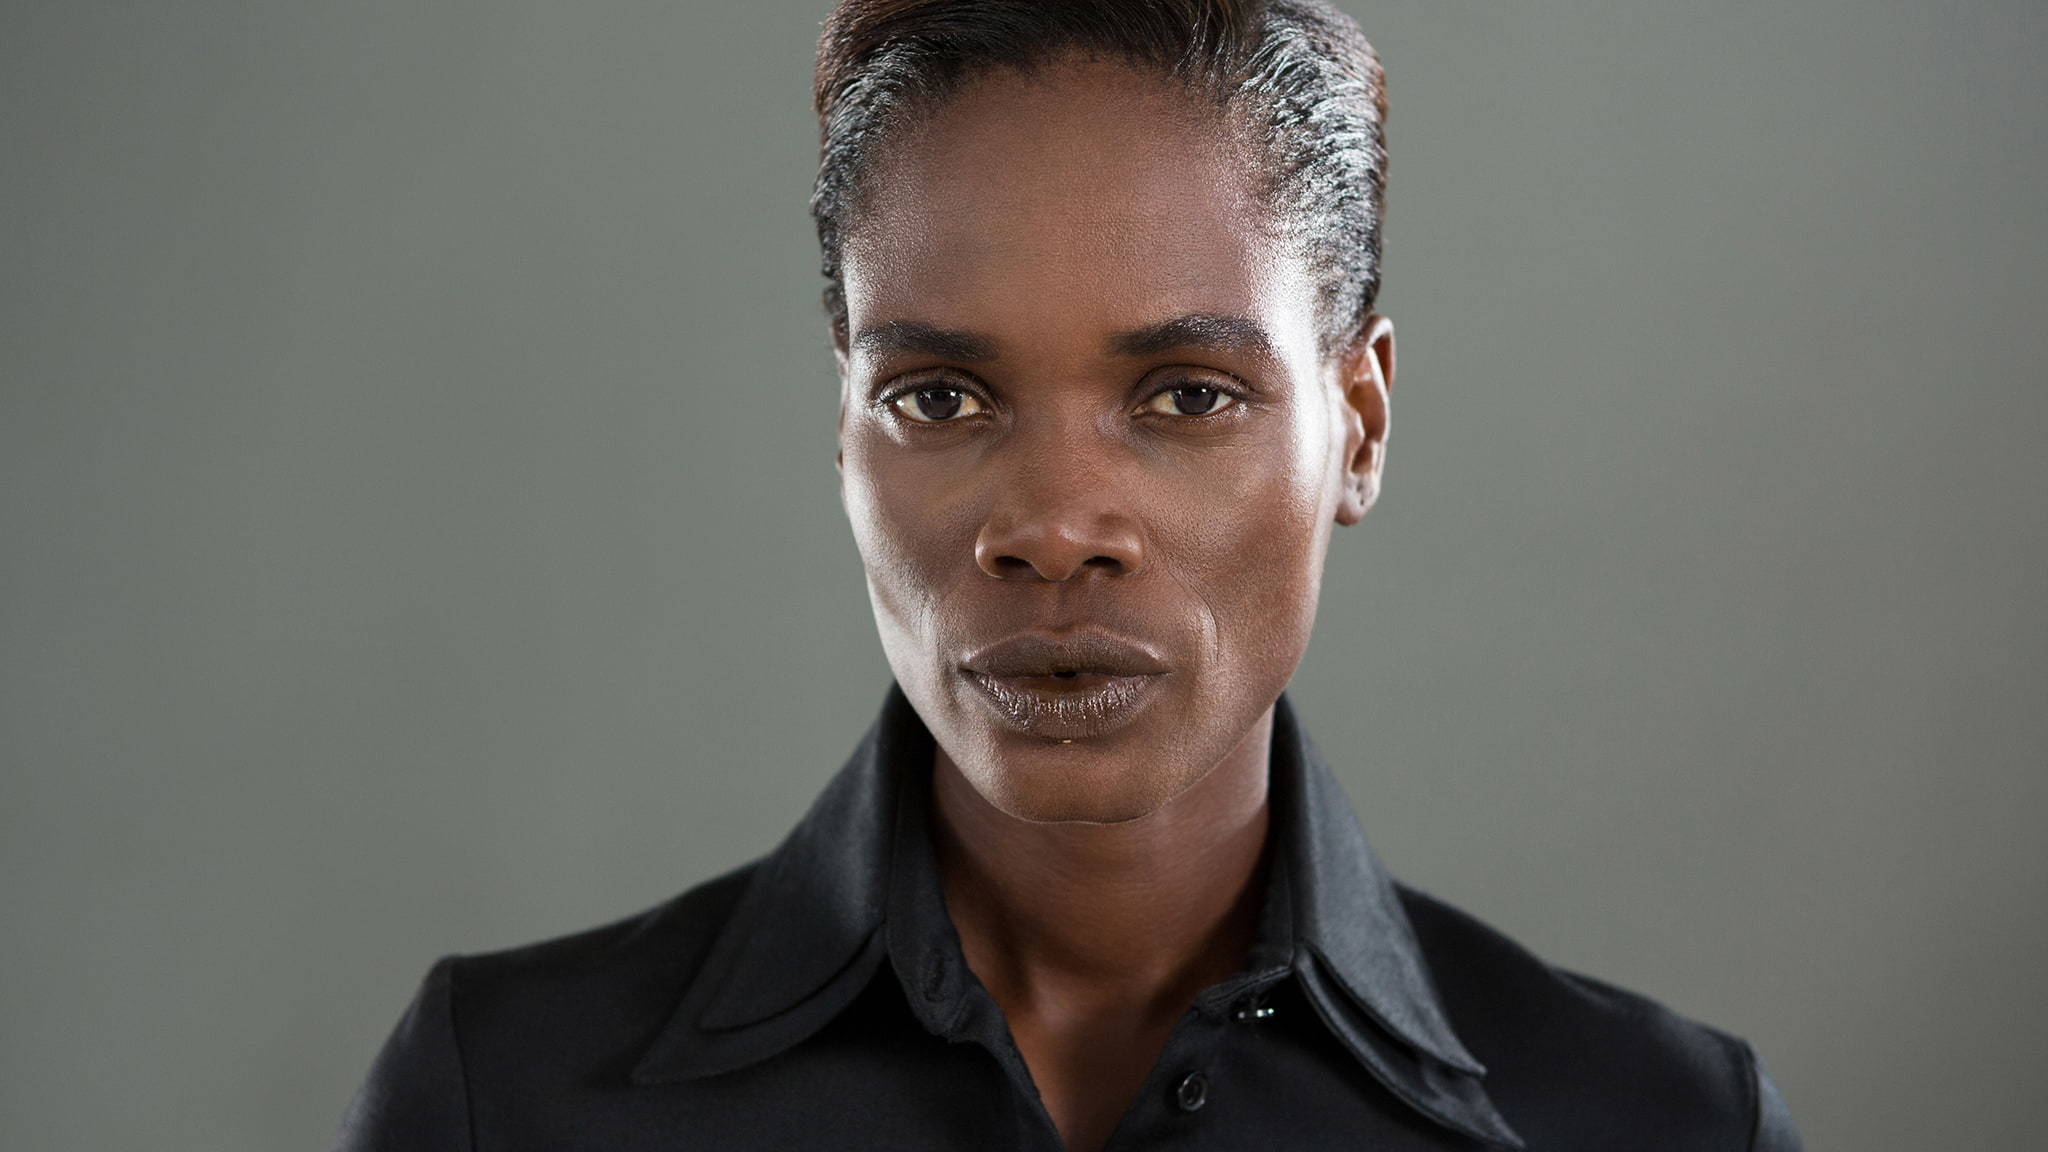 An African American Androgynous Person Wearing A Black Collared Shirt With A Serious Look On Their Face